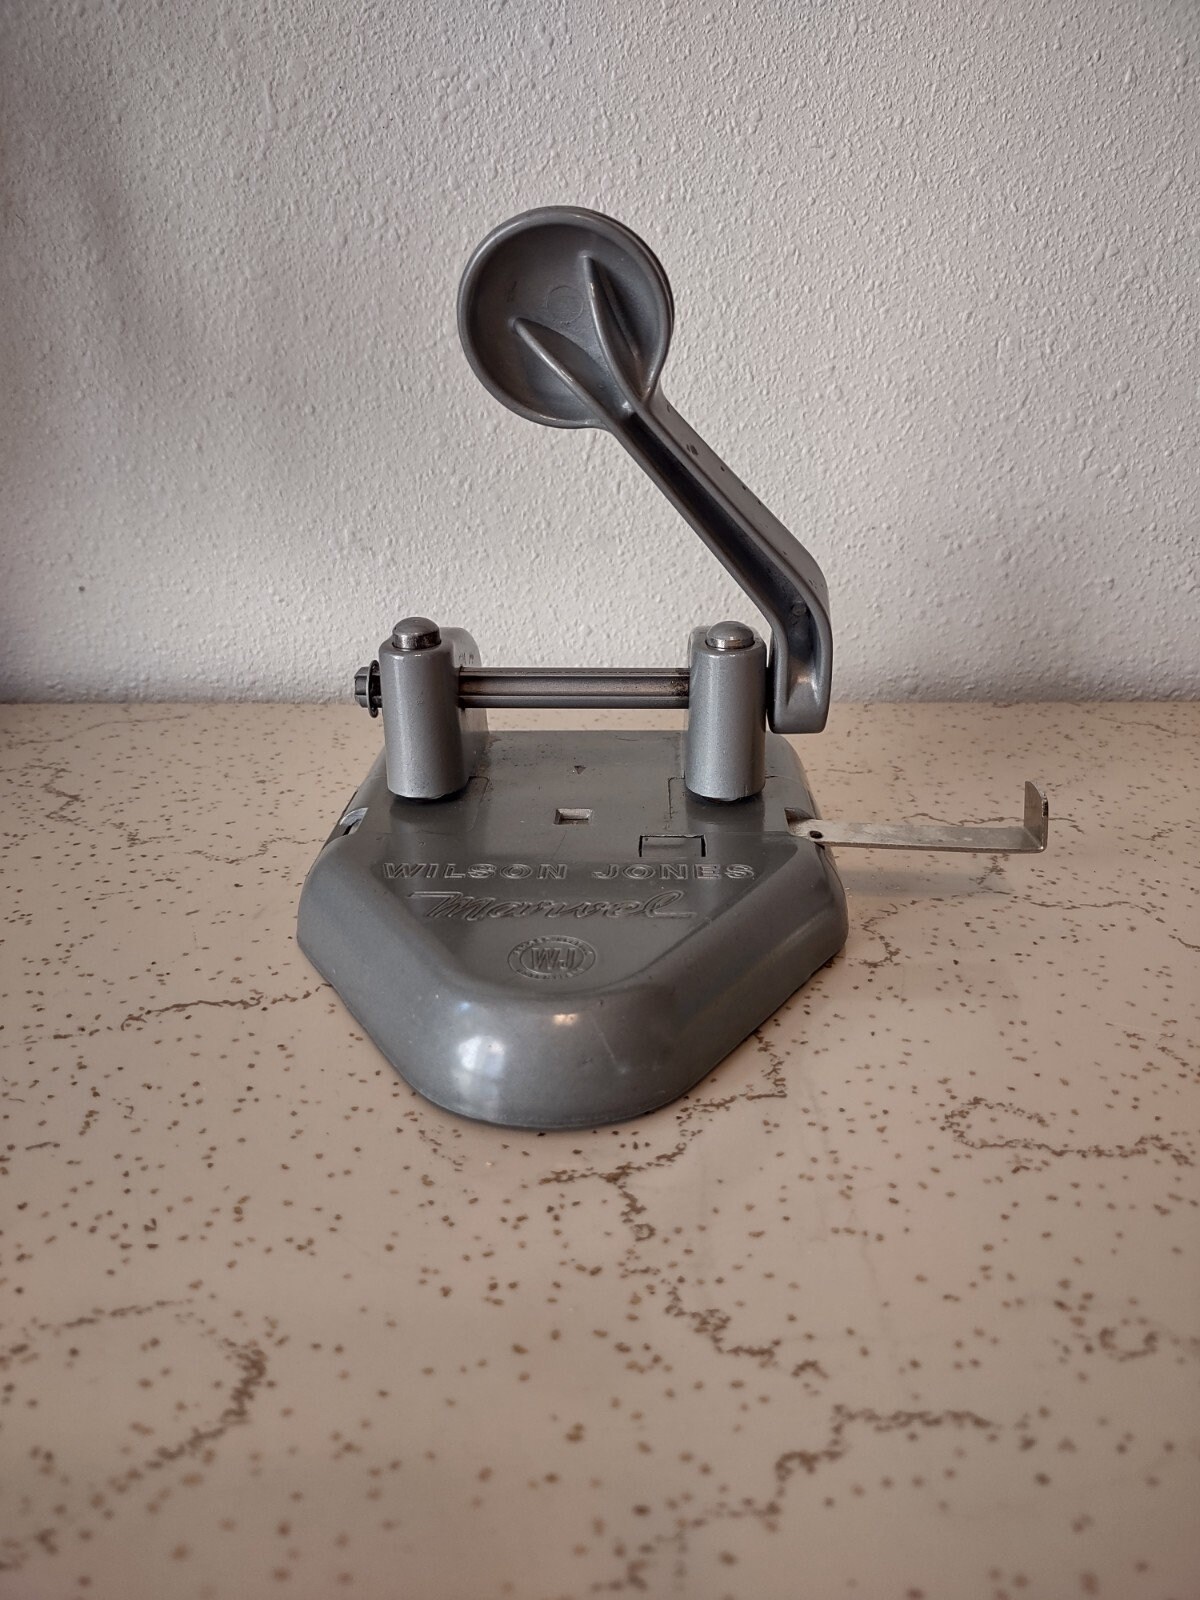 Vintage Boston 2 - Hole Punch Hunt Manufacturing Co.